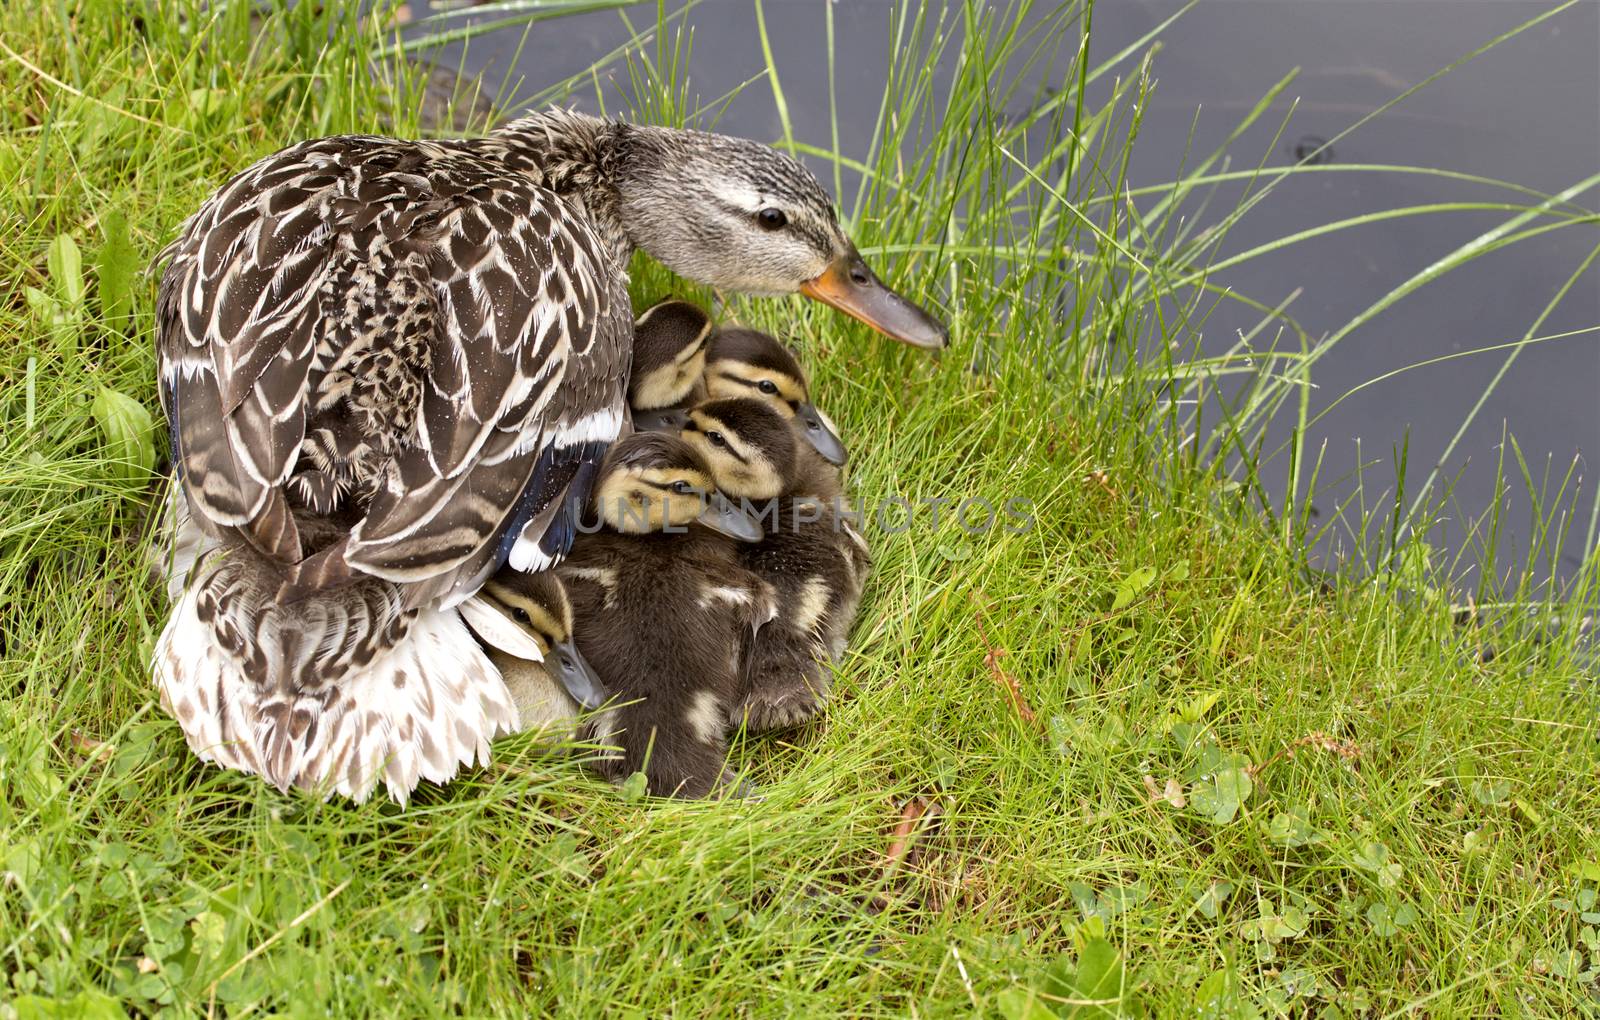 Mother Duck and Babies by pictureguy